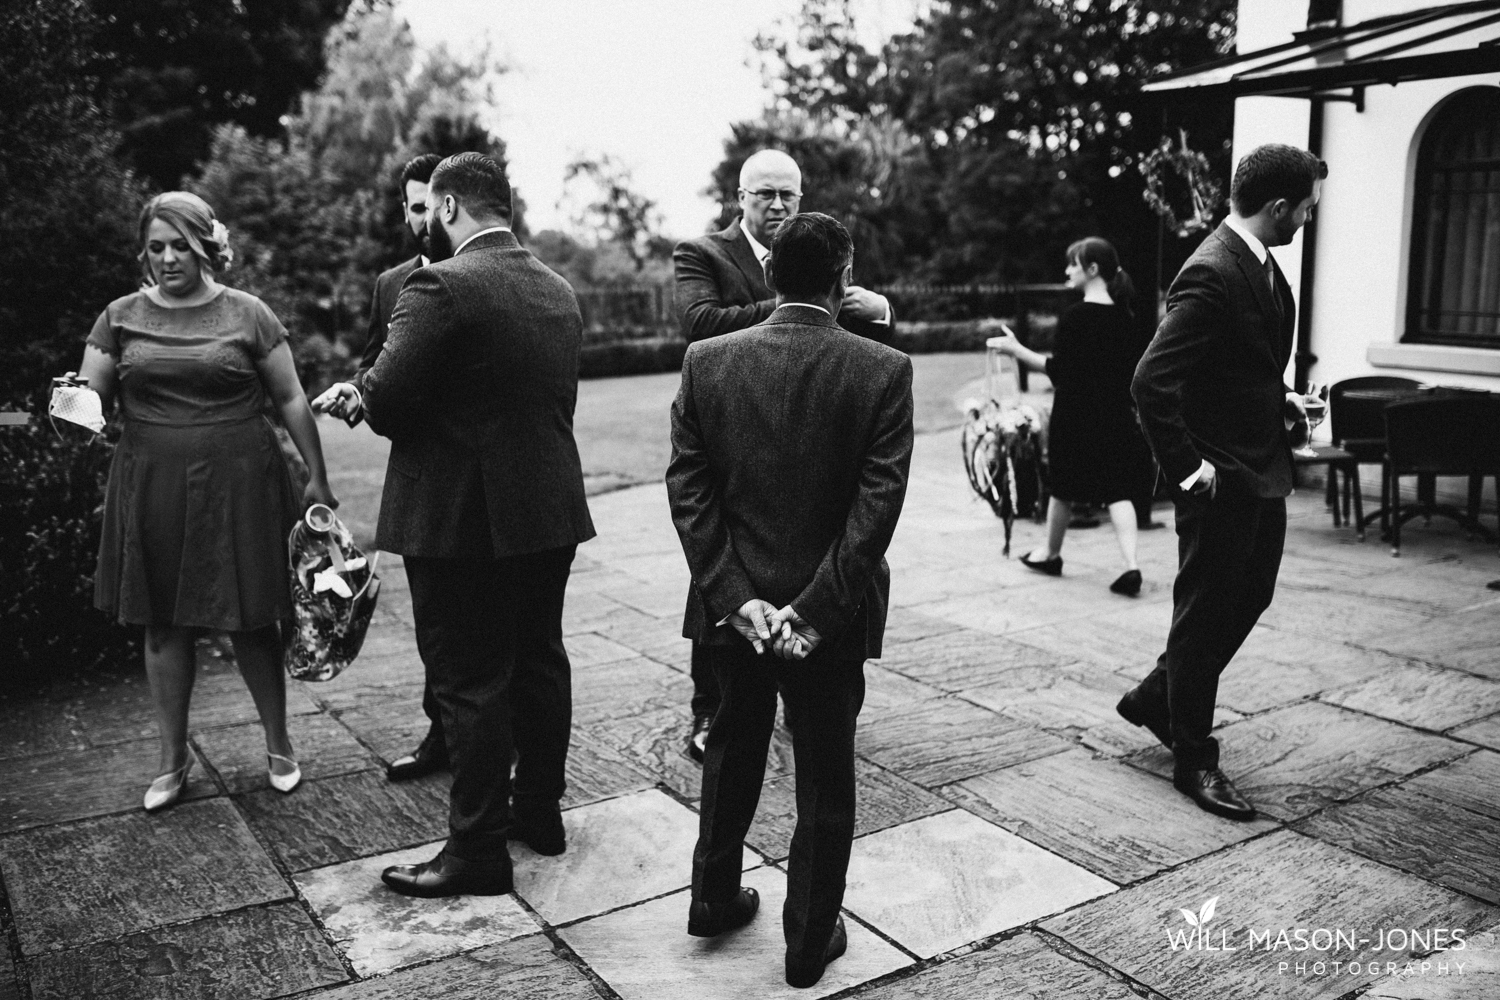  Groom preparations at The King Arthur Hotel Gower Swansea photography 